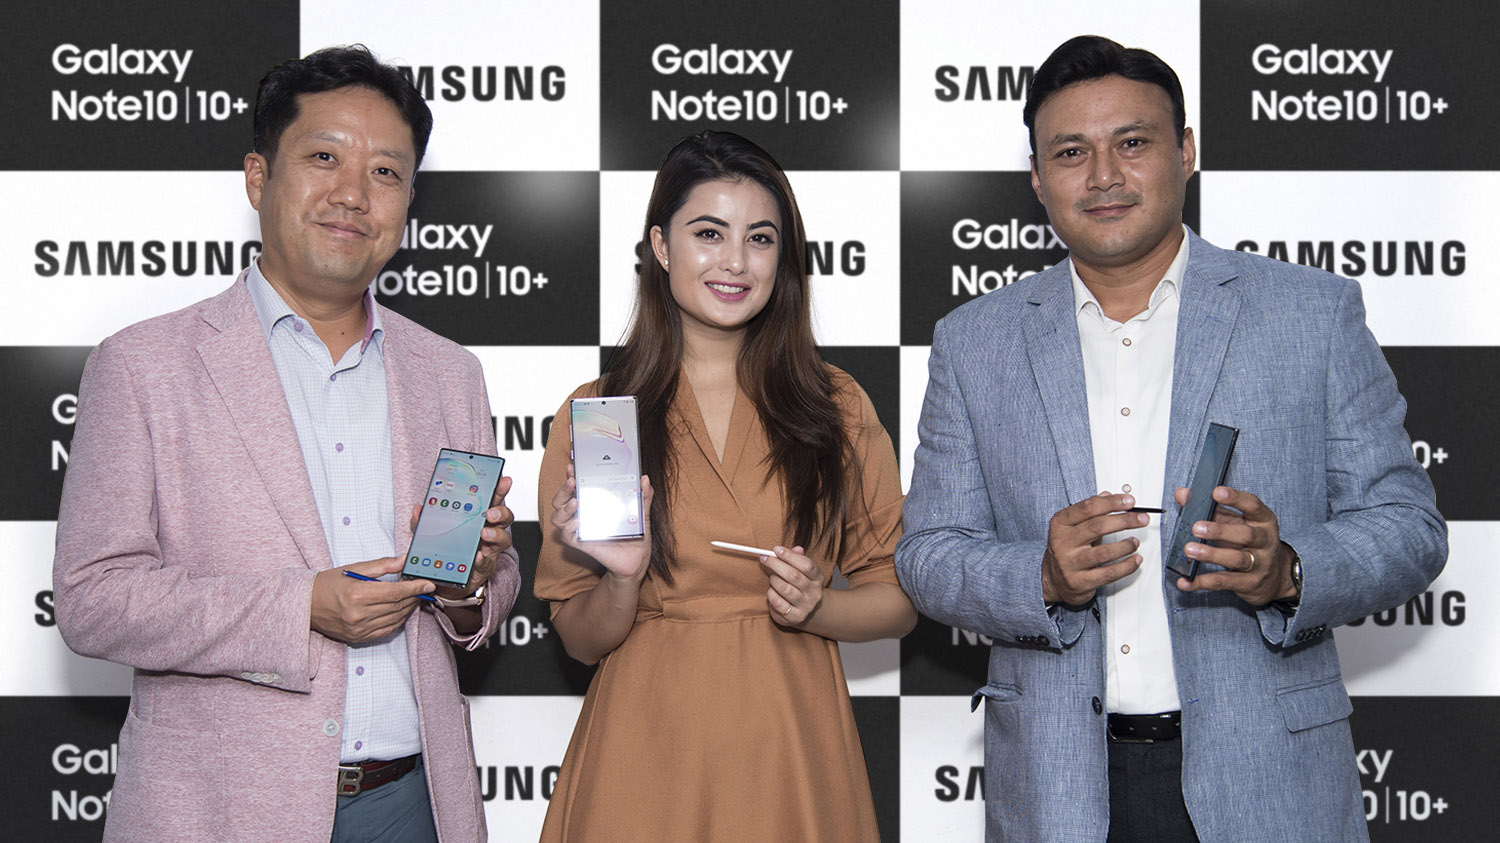 Samsung Galaxy Note 10 Plus Price in Nepal